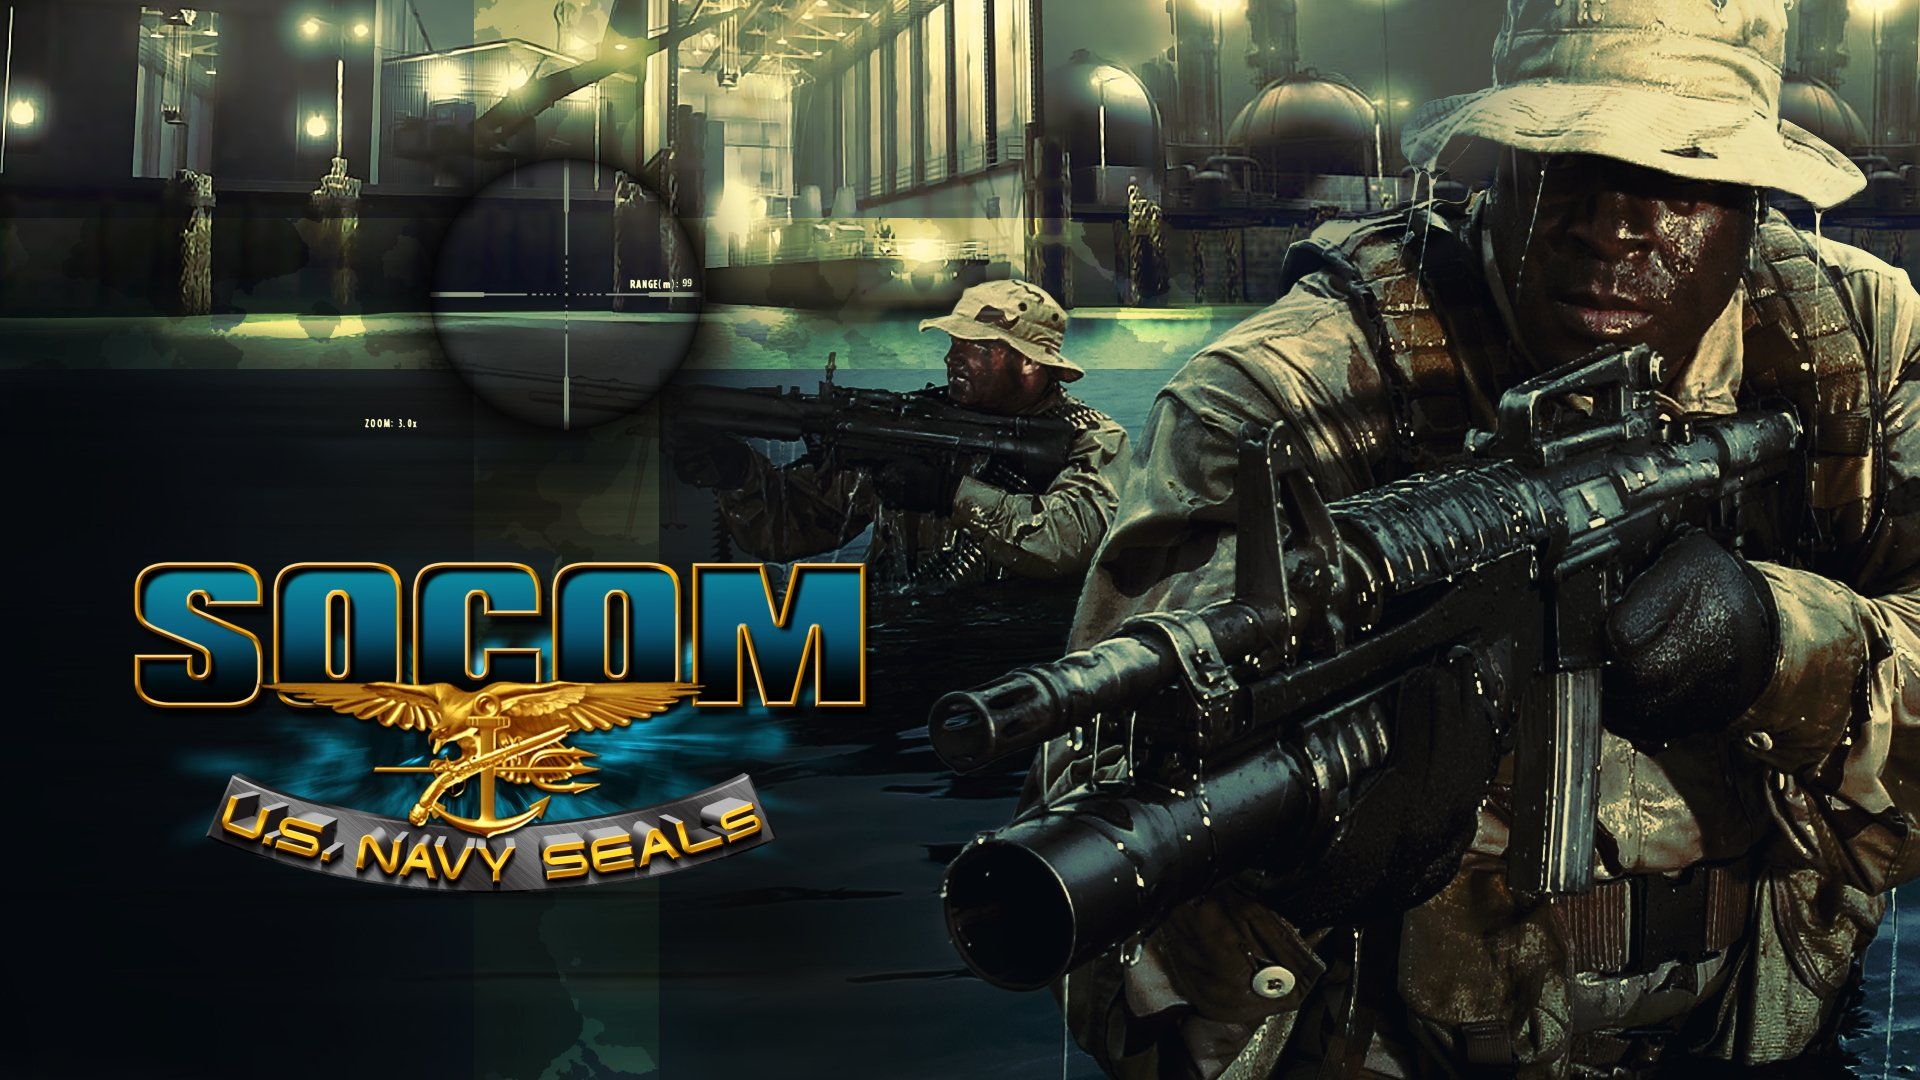 Promotional art for the SOCOM series